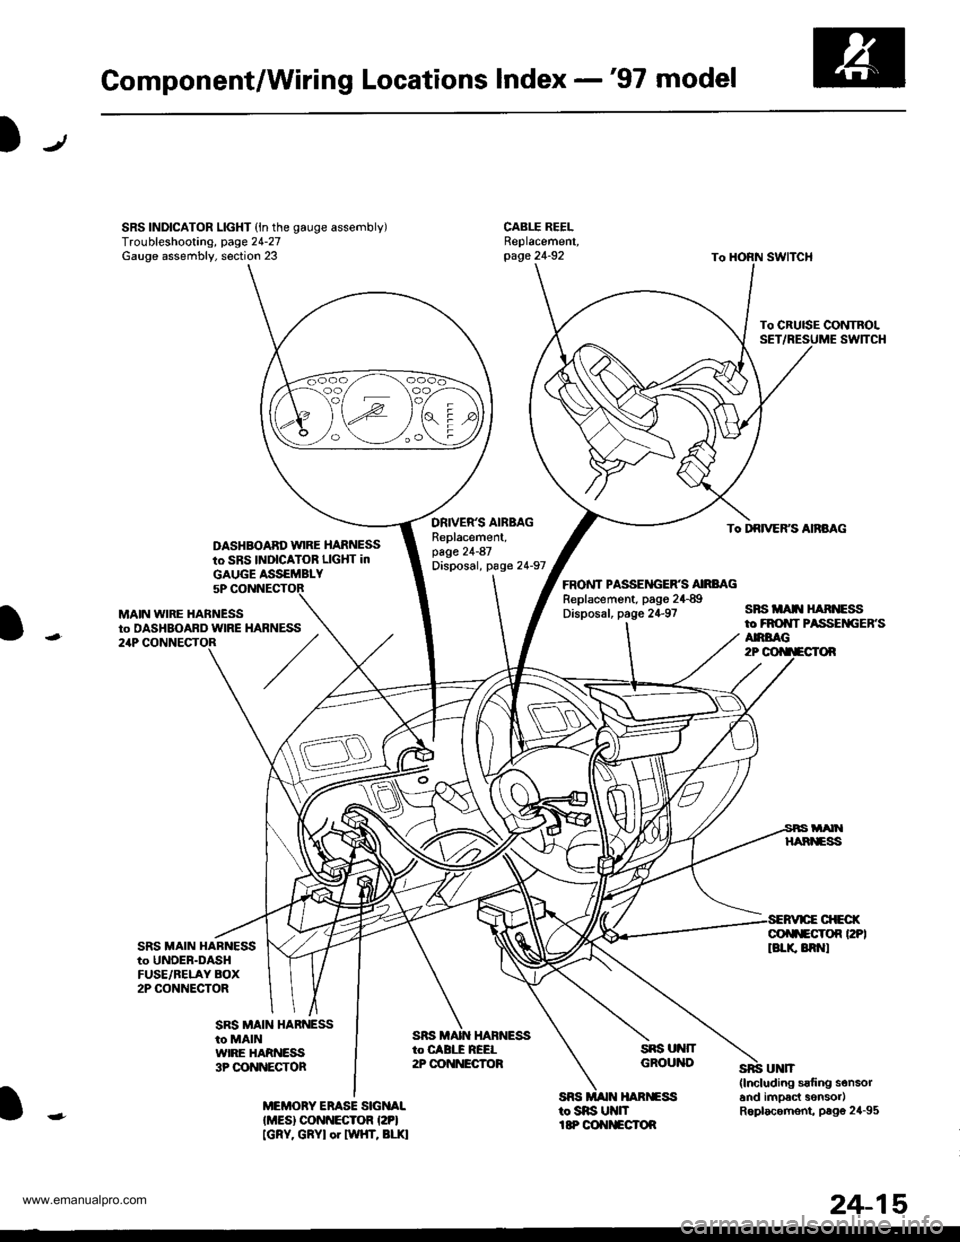 HONDA CR-V 2000 RD1-RD3 / 1.G User Guide 
Component/Wiring Locations Index -97 model
SRS INDICATOR LIGHT (ln the gauge assembly)Troubleshooting, page 24-27Gauge assembly, section 23
DASHBOABD w|RE HARNESS
to SBS INDICATOR LIGHT in
DRIVERS 